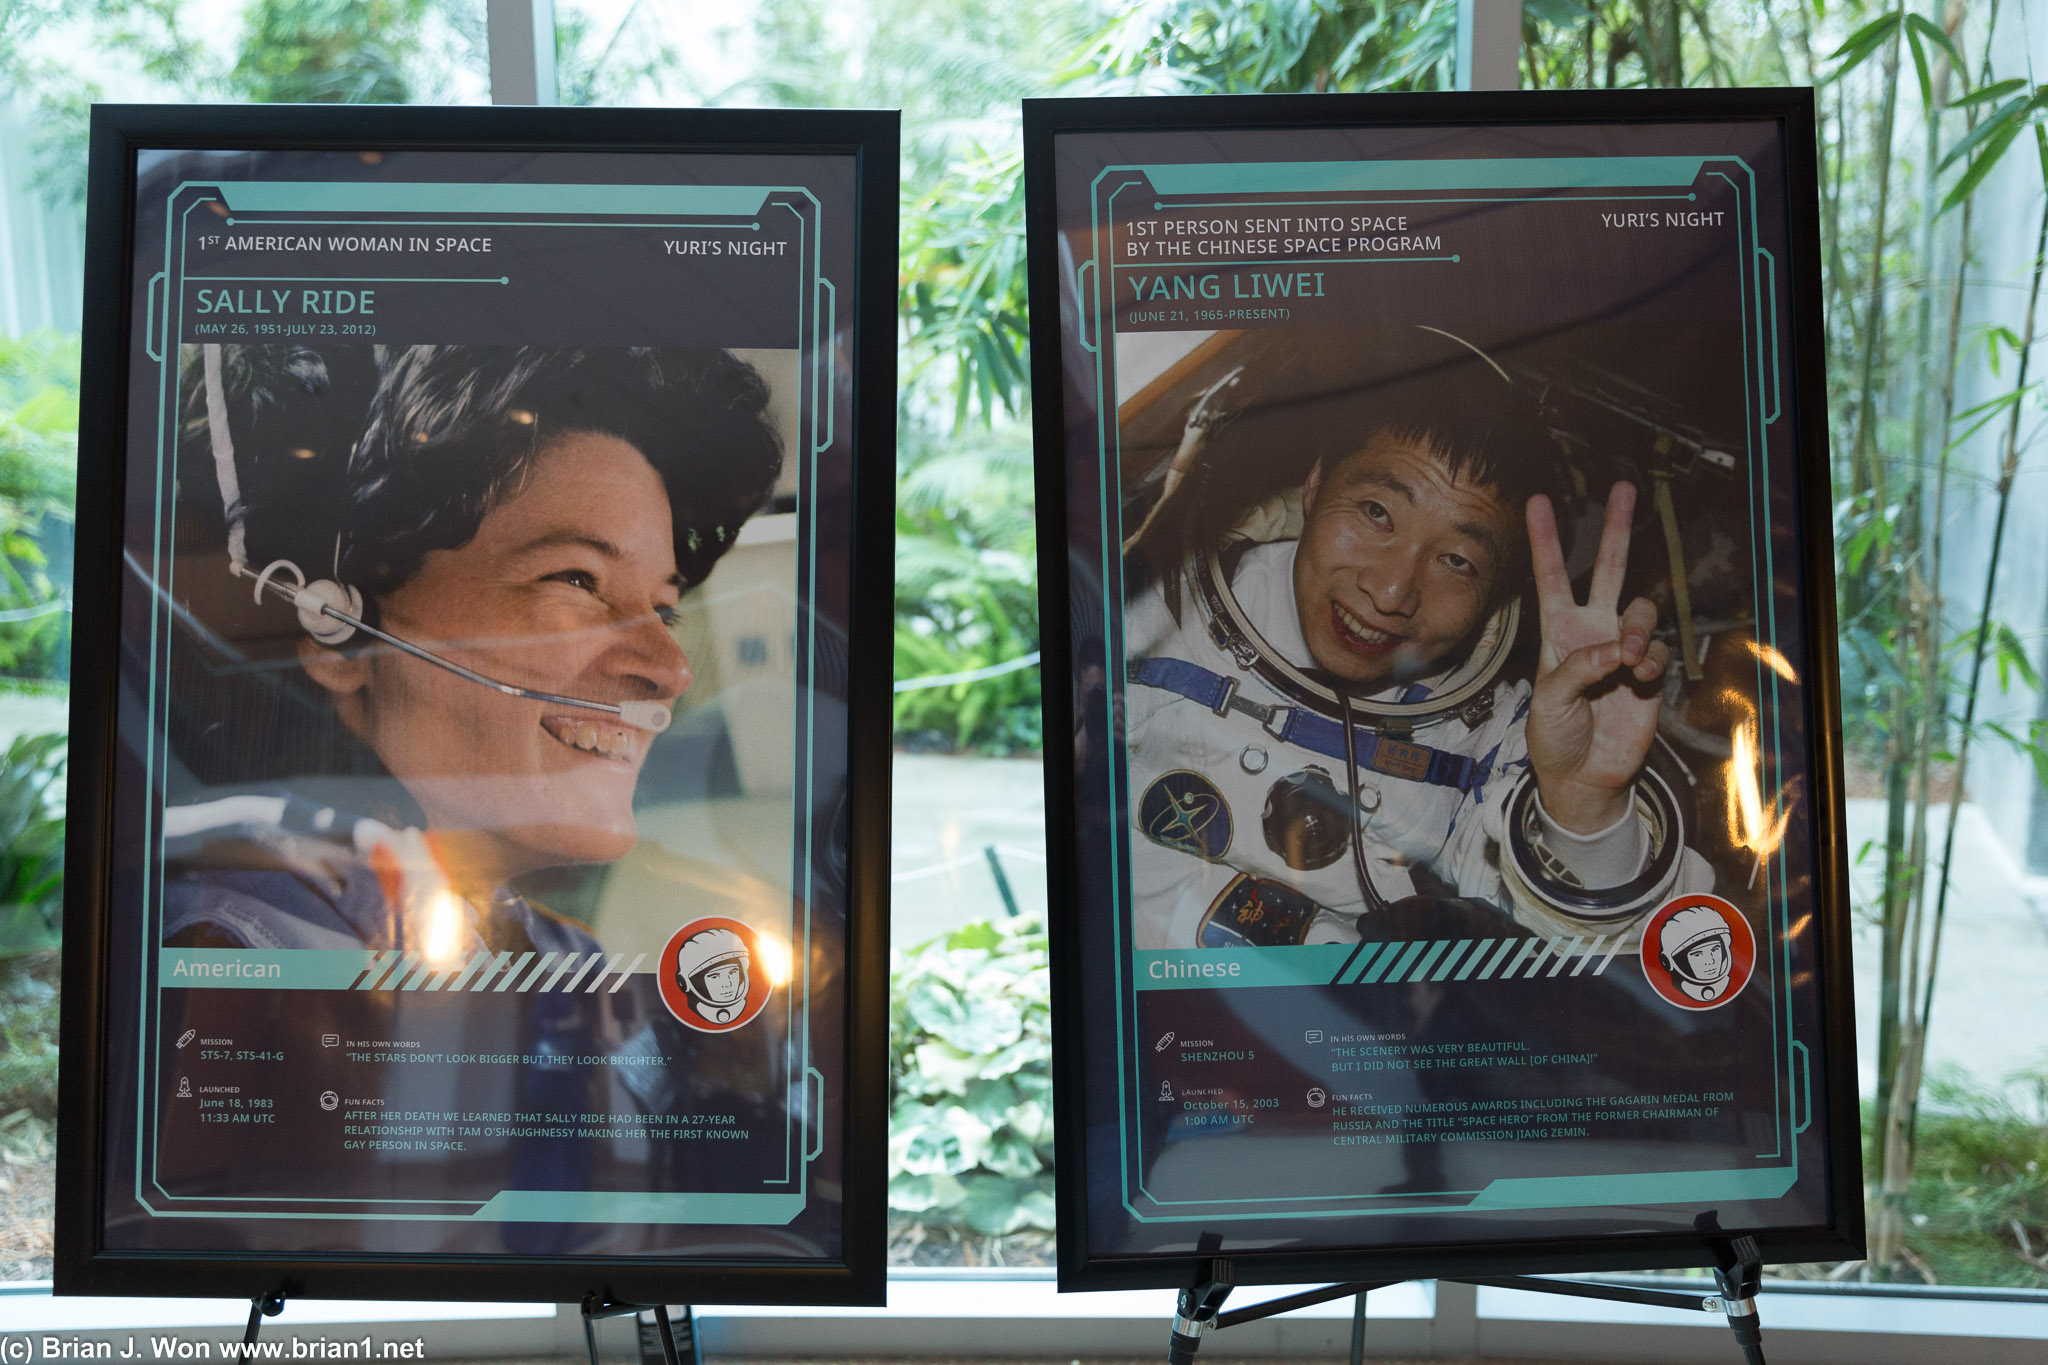 Very cool-- posters of significant astronauts and attendees.